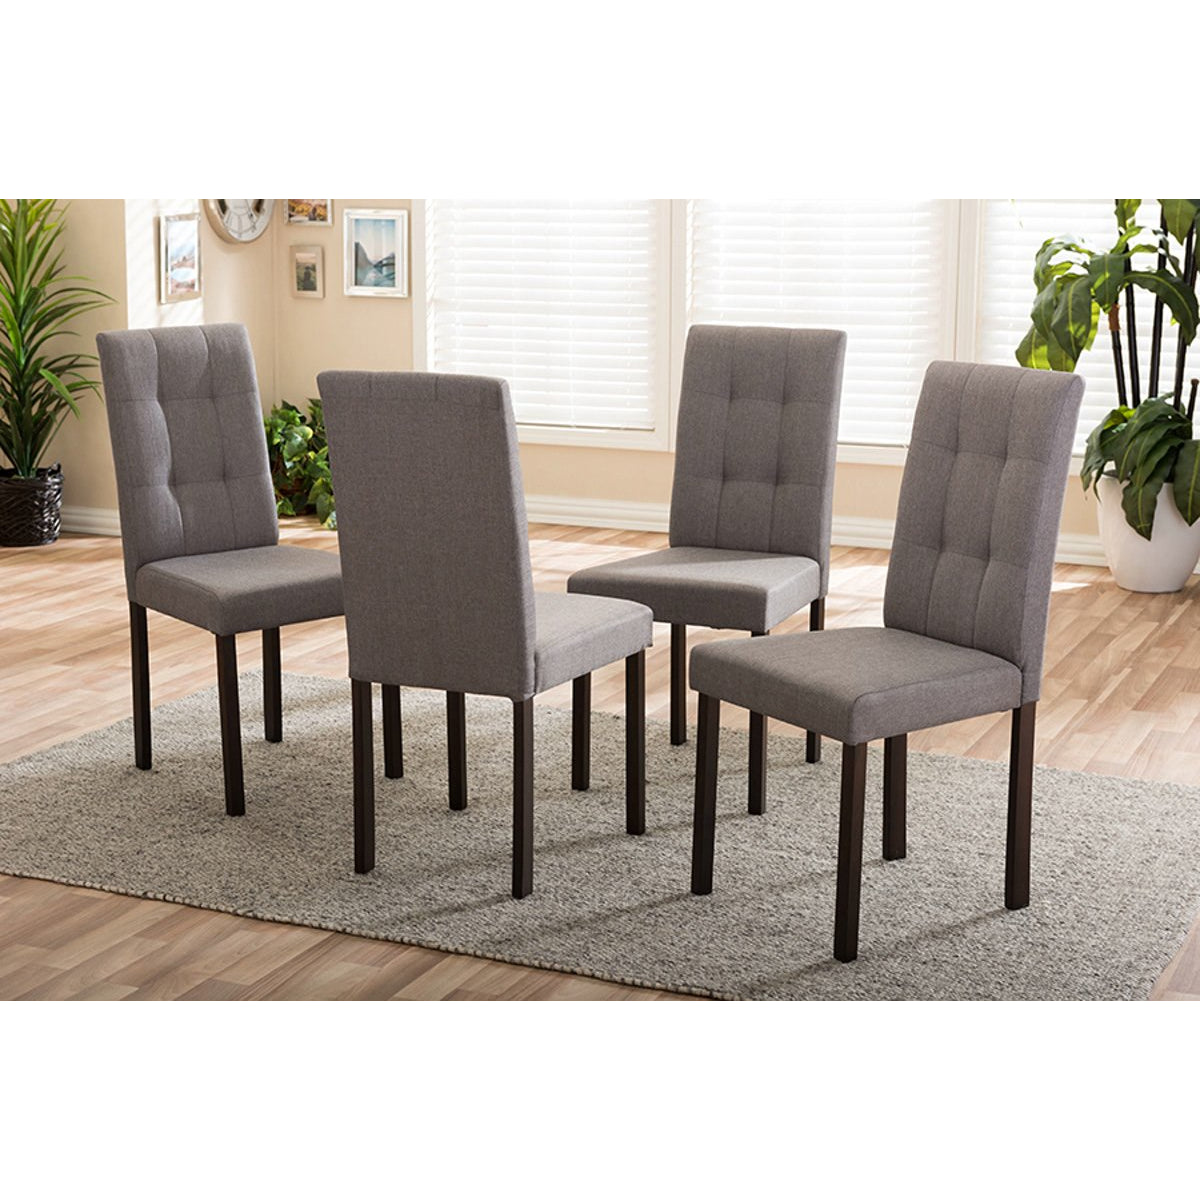 Baxton Studio Andrew Modern and Contemporary Grey Fabric Upholstered Grid-tufting Dining Chair (Set of 4) Baxton Studio-dining chair-Minimal And Modern - 2